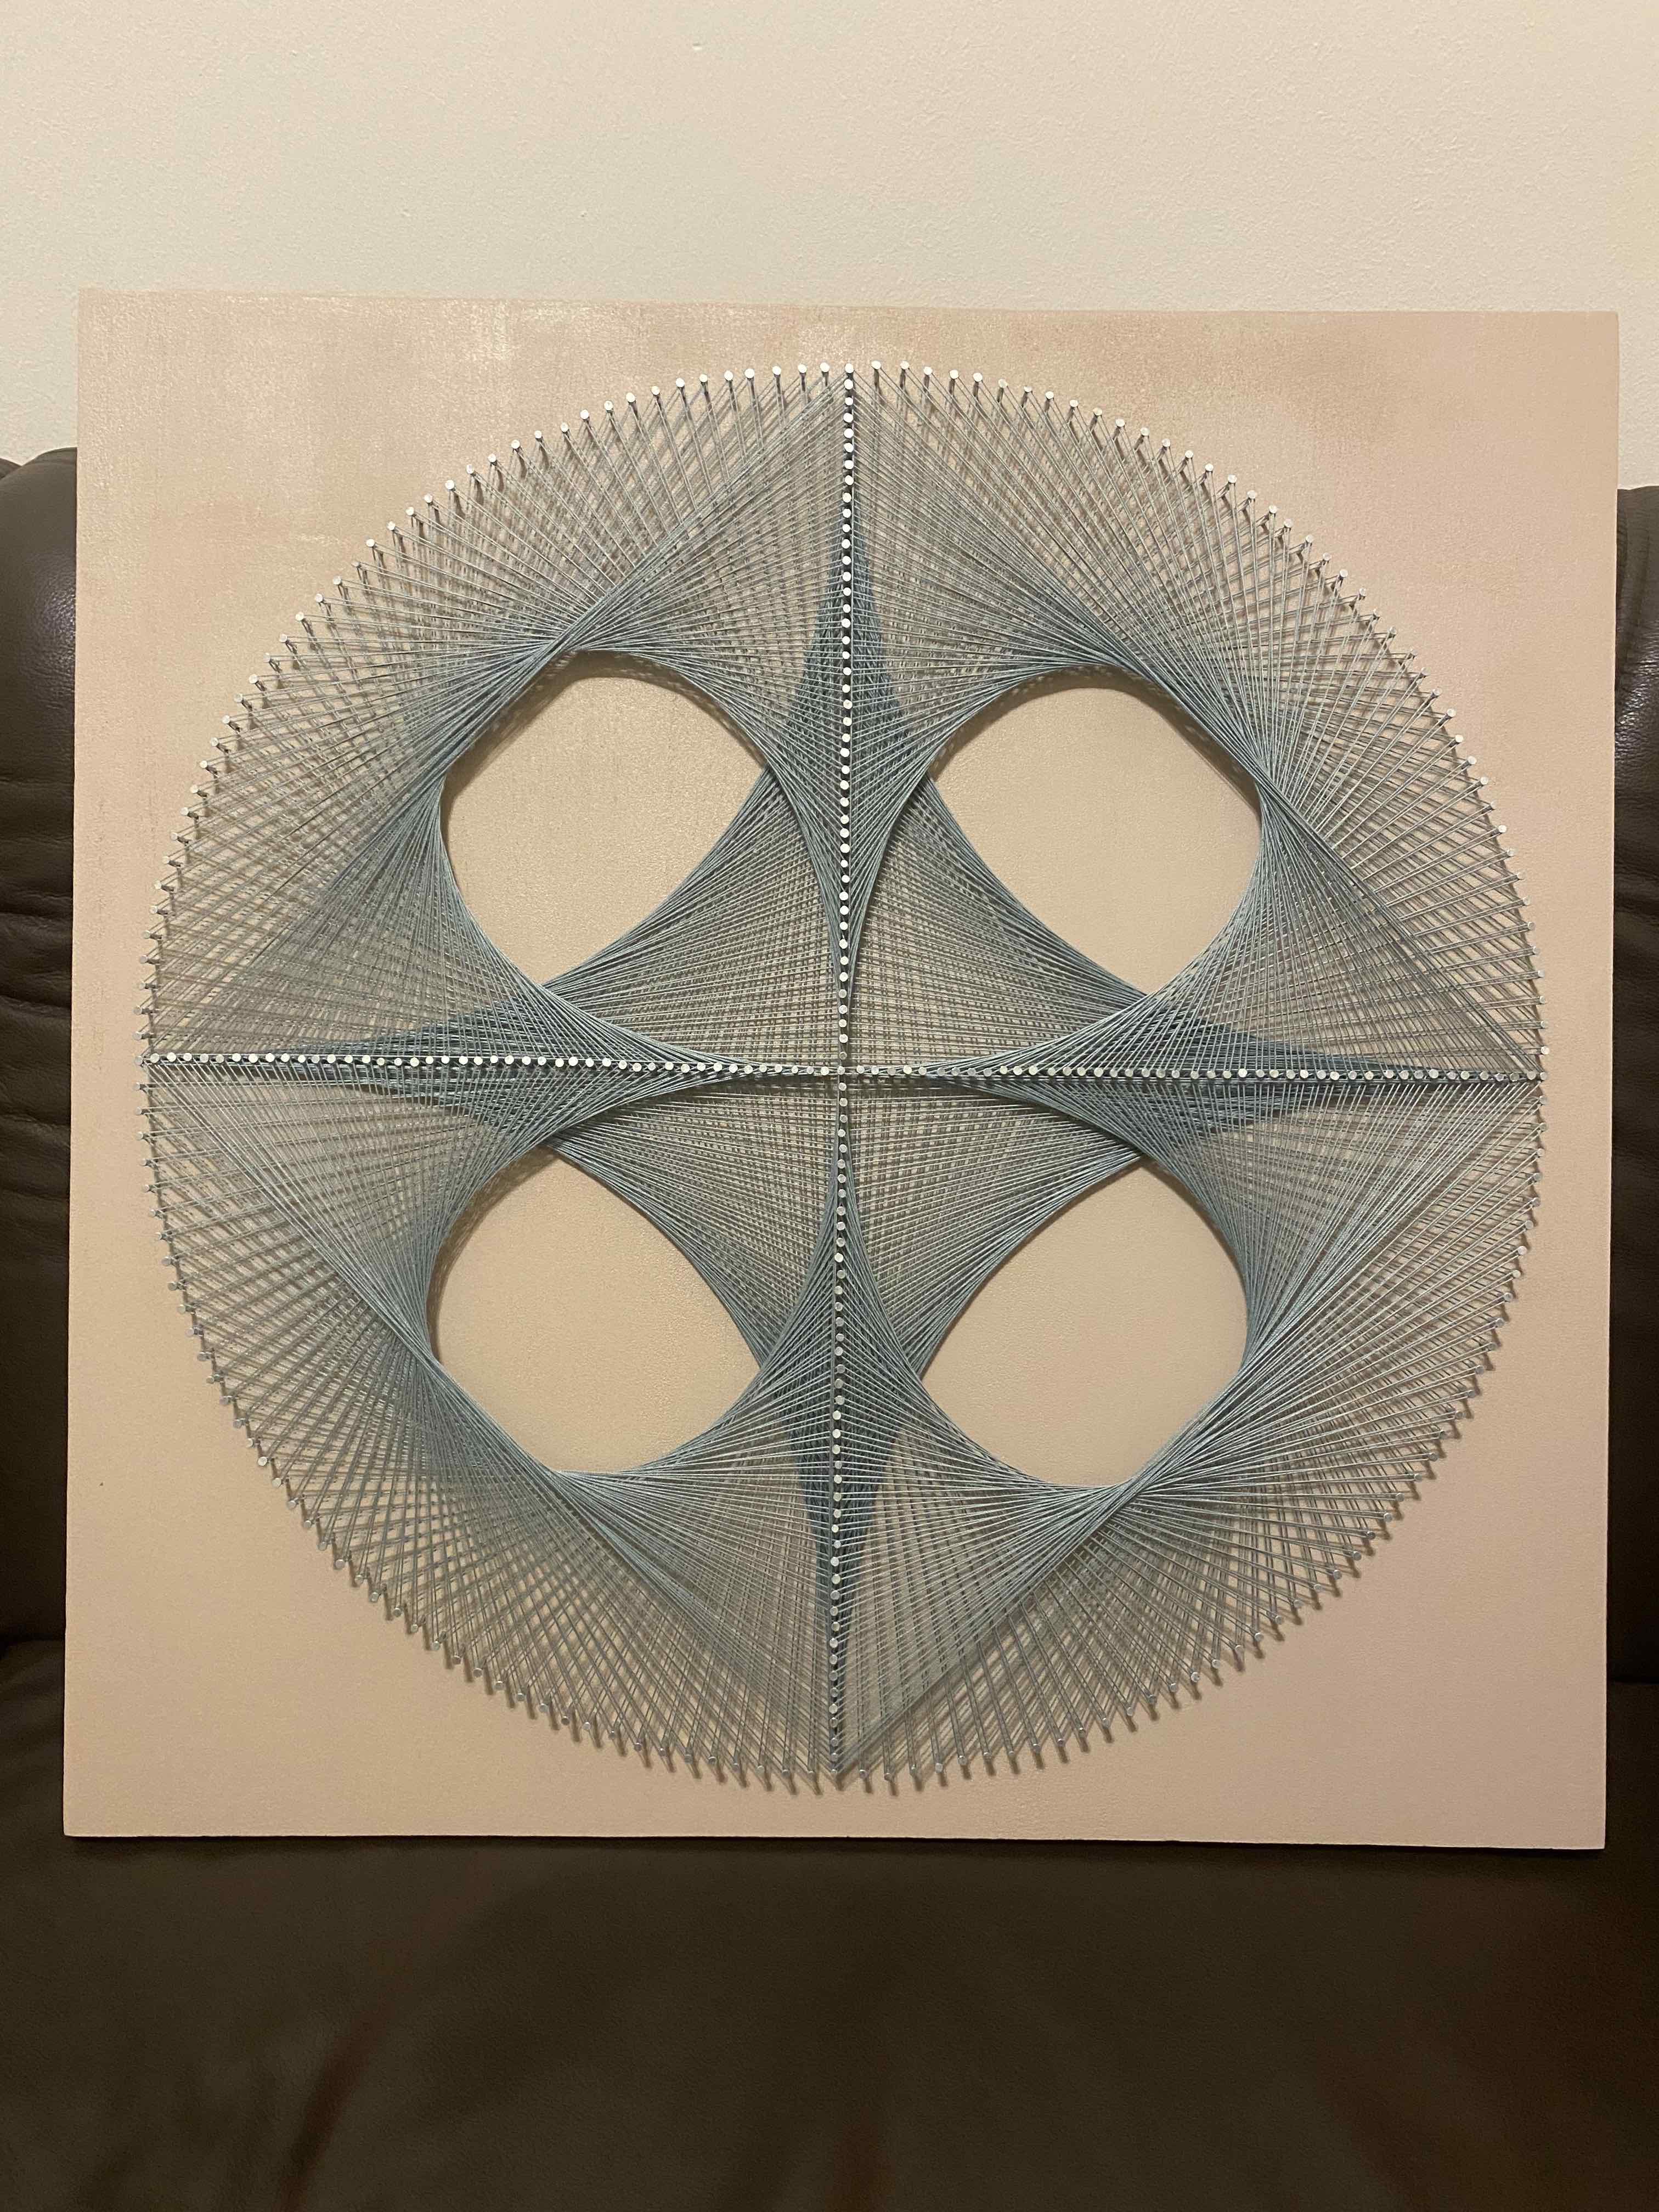 picture of my second final string art piece with a clover pattern